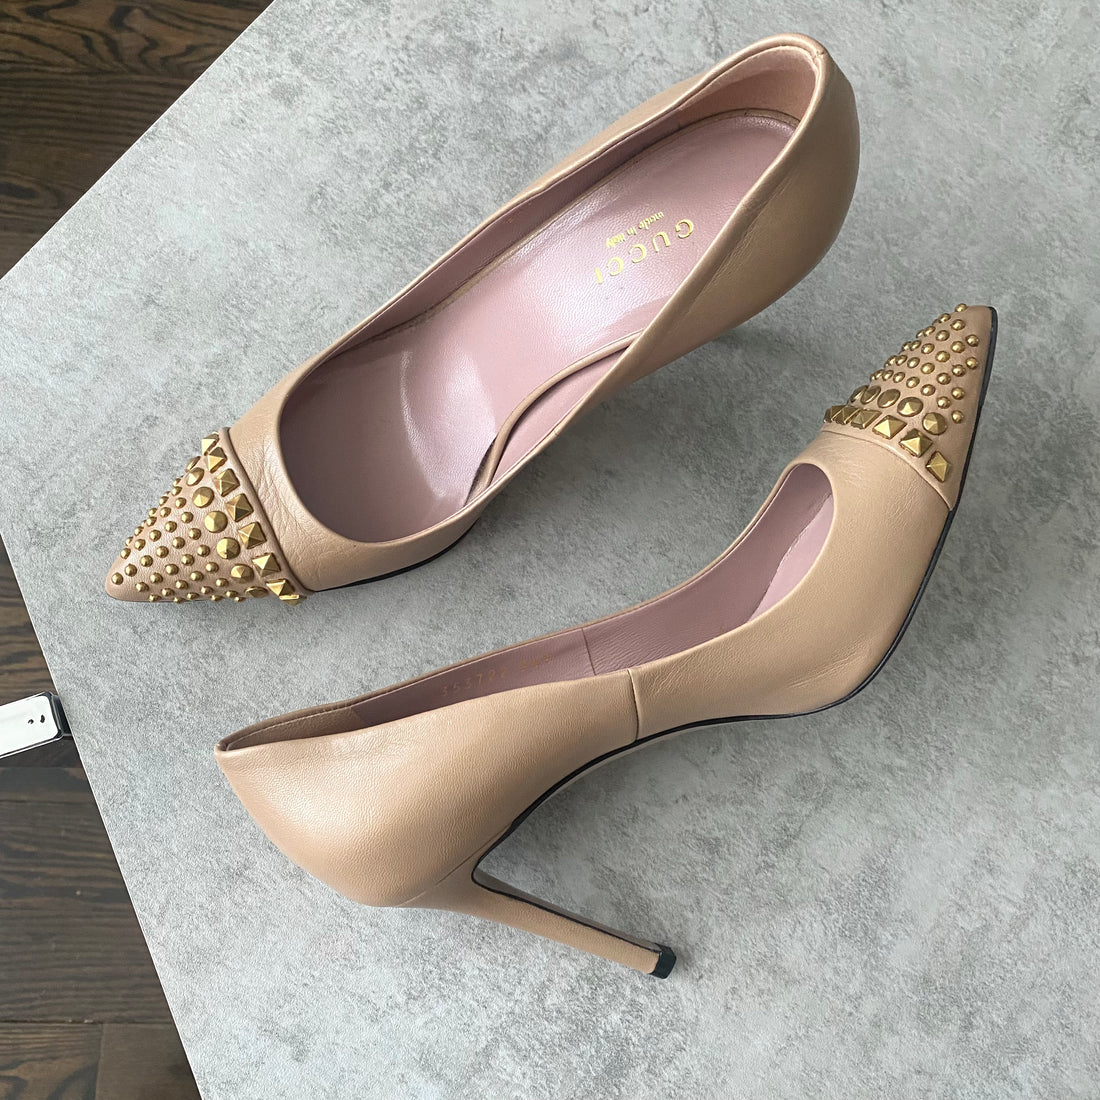 Gucci Beige Studded Leather Pumps - 37